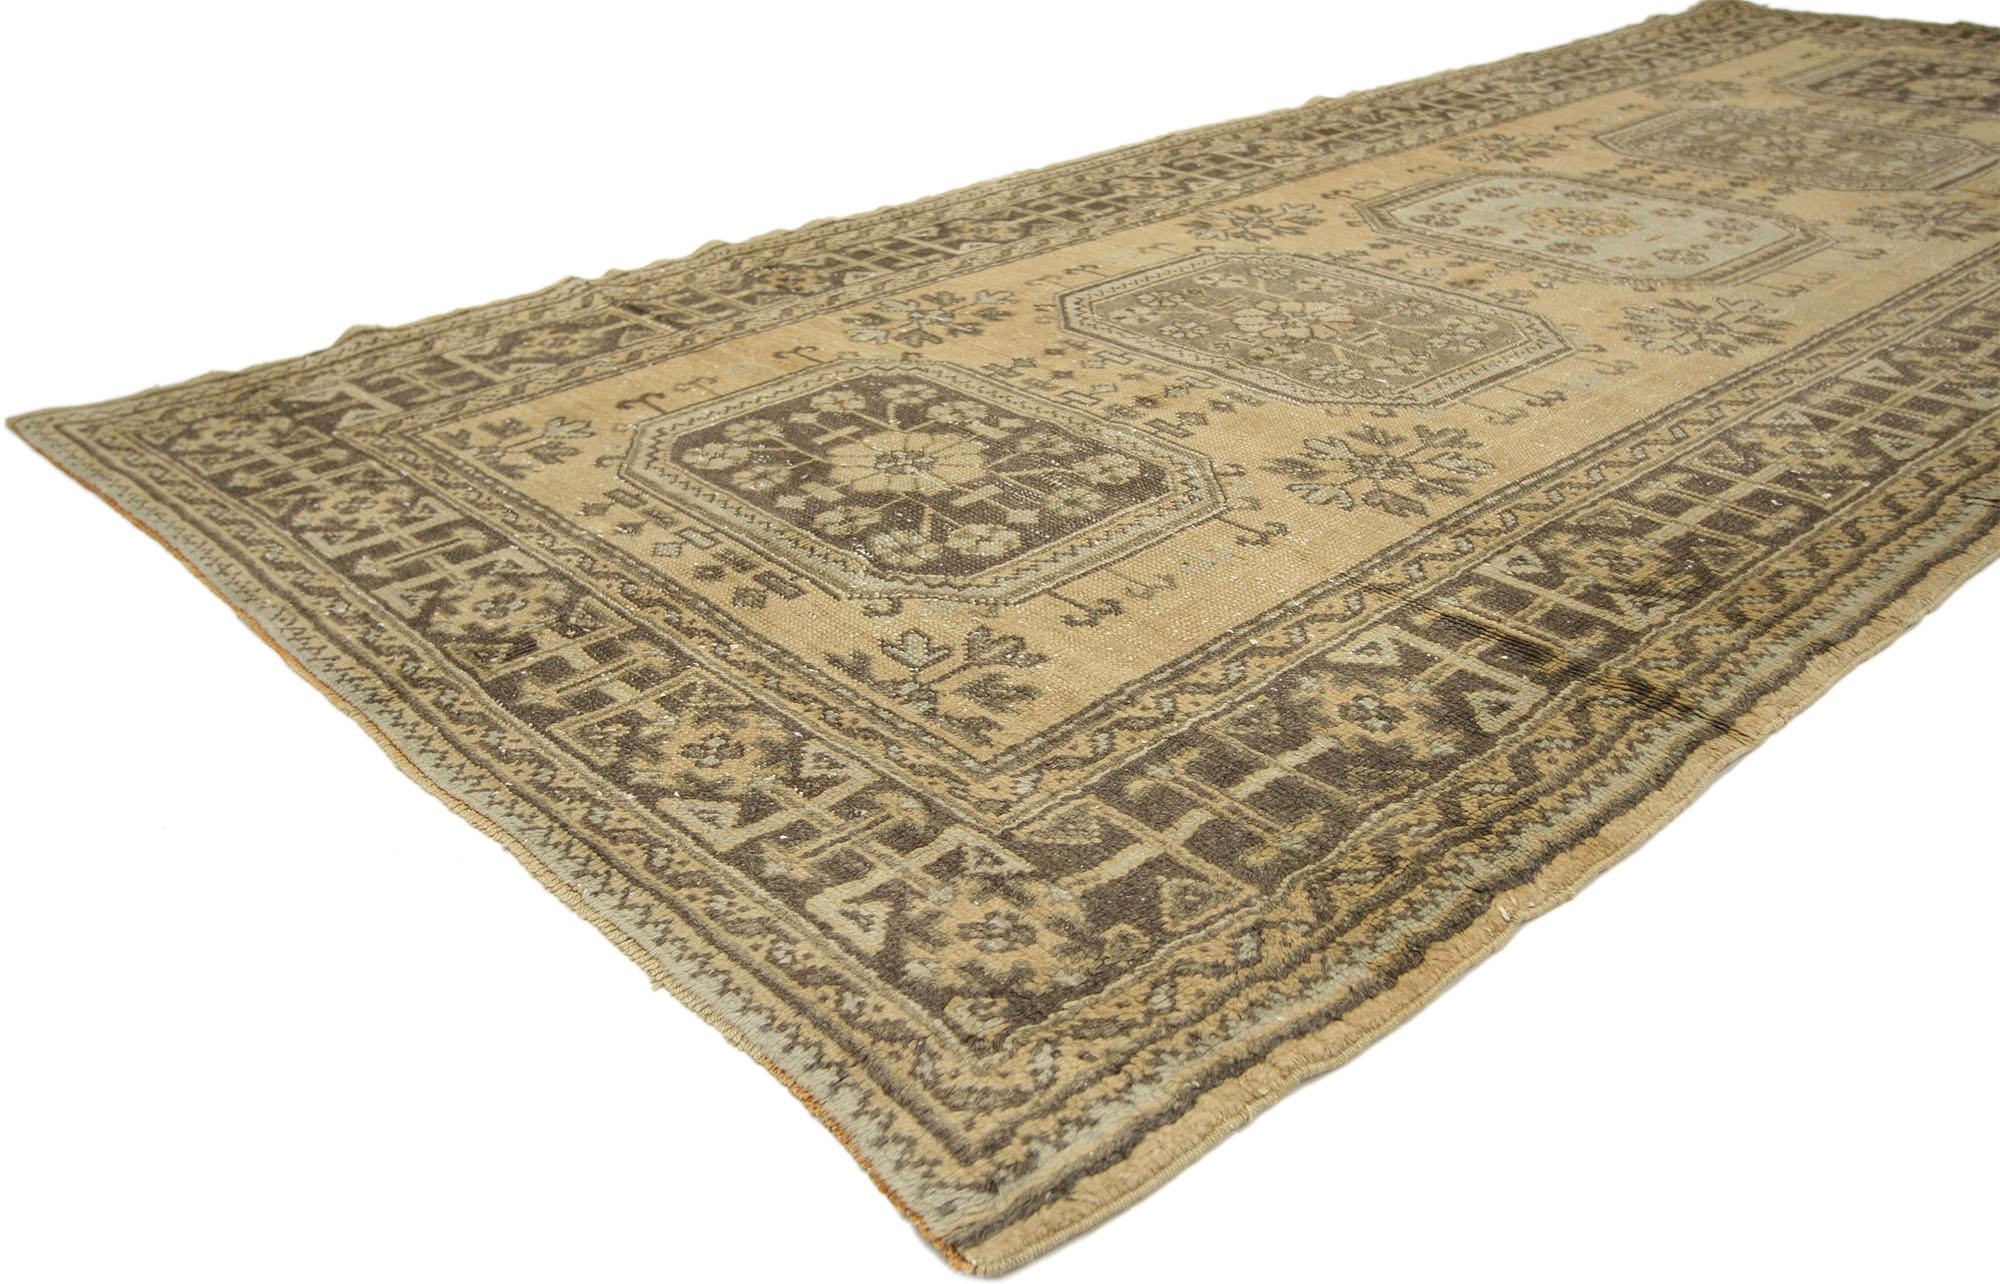 51144 Vintage Turkish Oushak Hallway runner 05'00 x 11'09. This hand-knotted wool vintage Turkish Oushak runner features five amulet medallions filled with roundels and floral sprays floating on an abrashed ecru field dotted with complementary